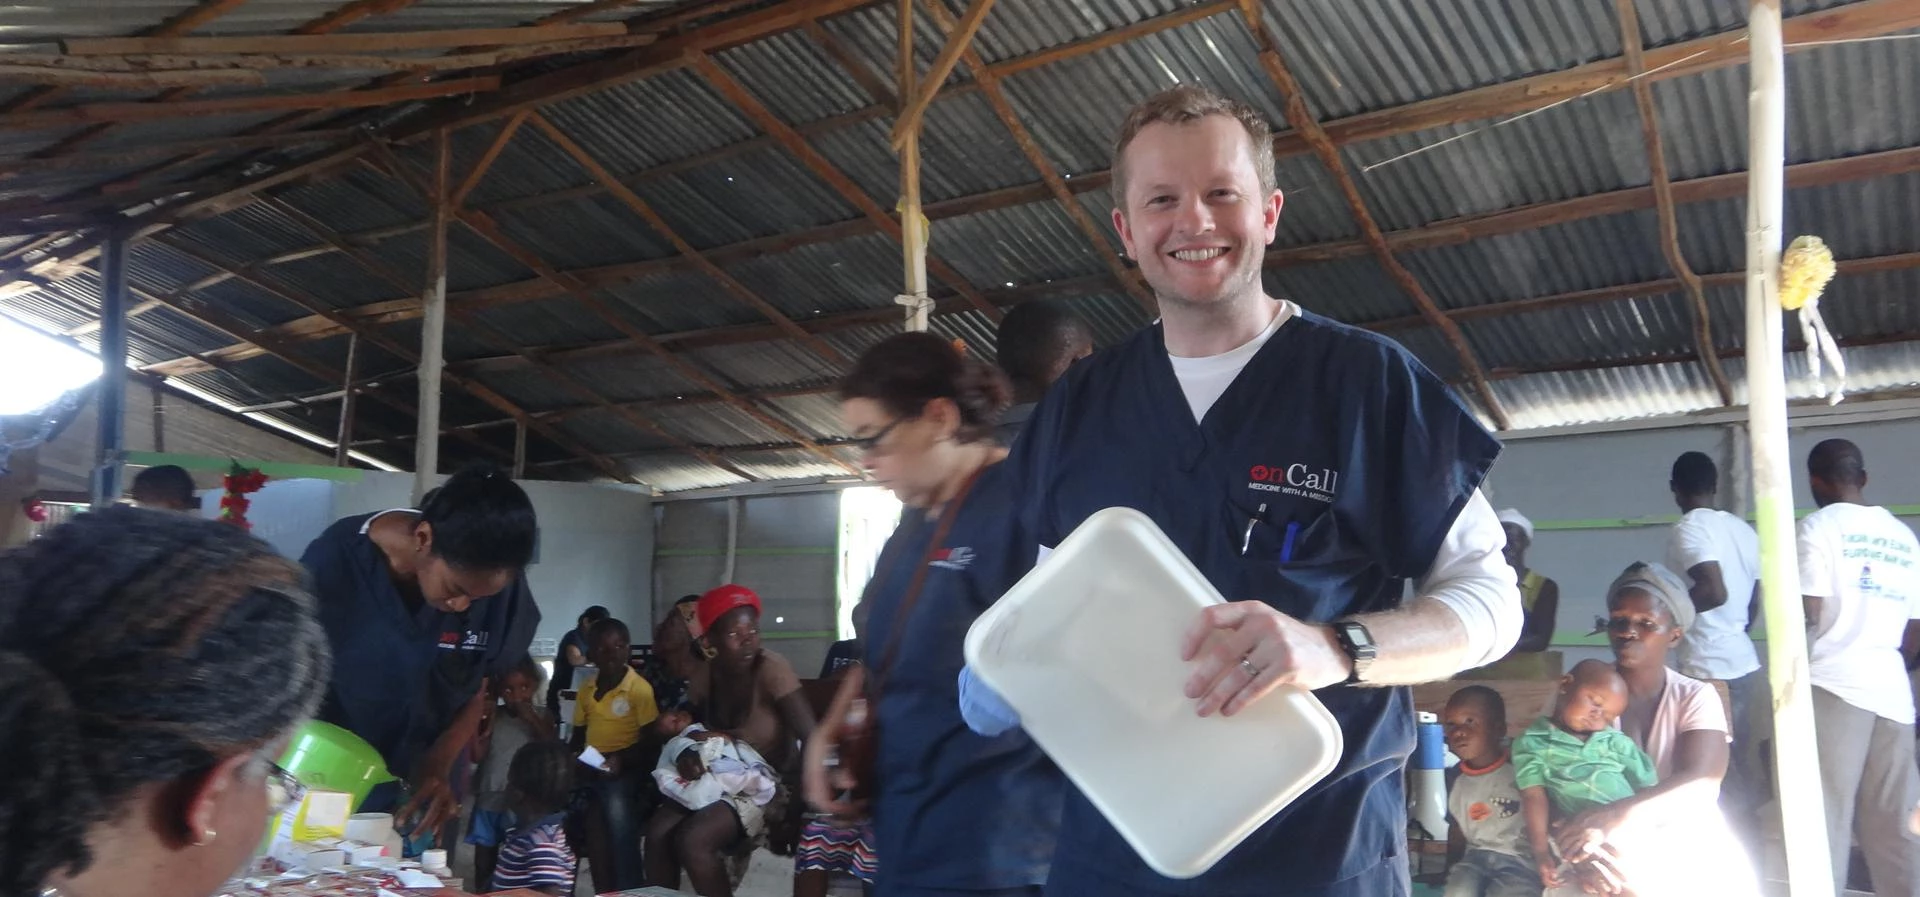 Ben Slaymaker in Haiti with OnCall